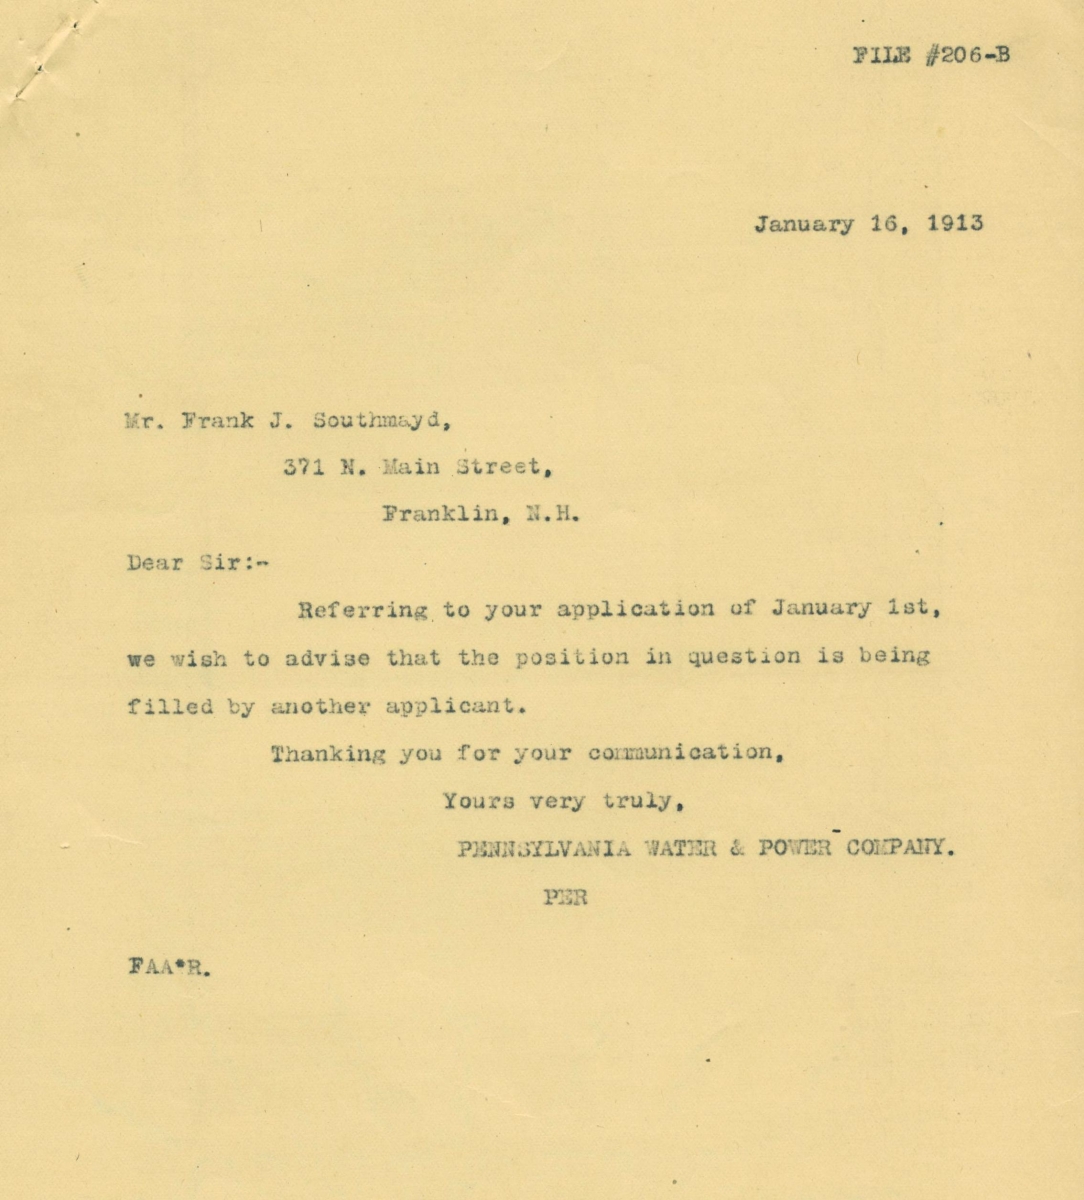 Typed rejection letter to Frank Southmayd from Pennsylvania Water & Power, 1913